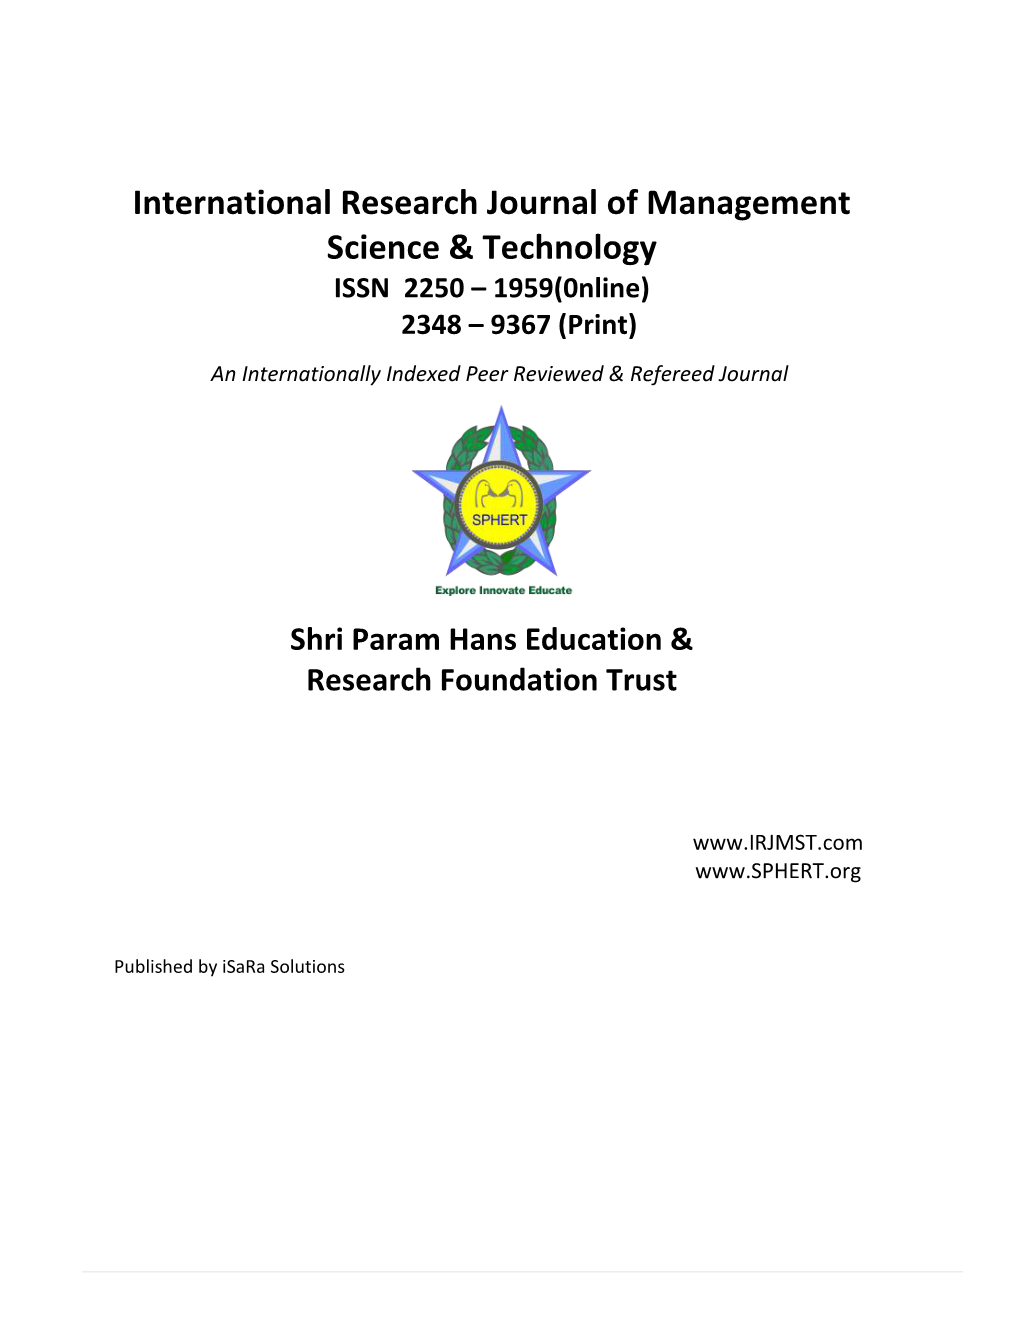 ISSN 2250 – 1959(0Nline) 2348 – 9367 (Print) an Internationally Indexed Peer Reviewed & Refereed Journal